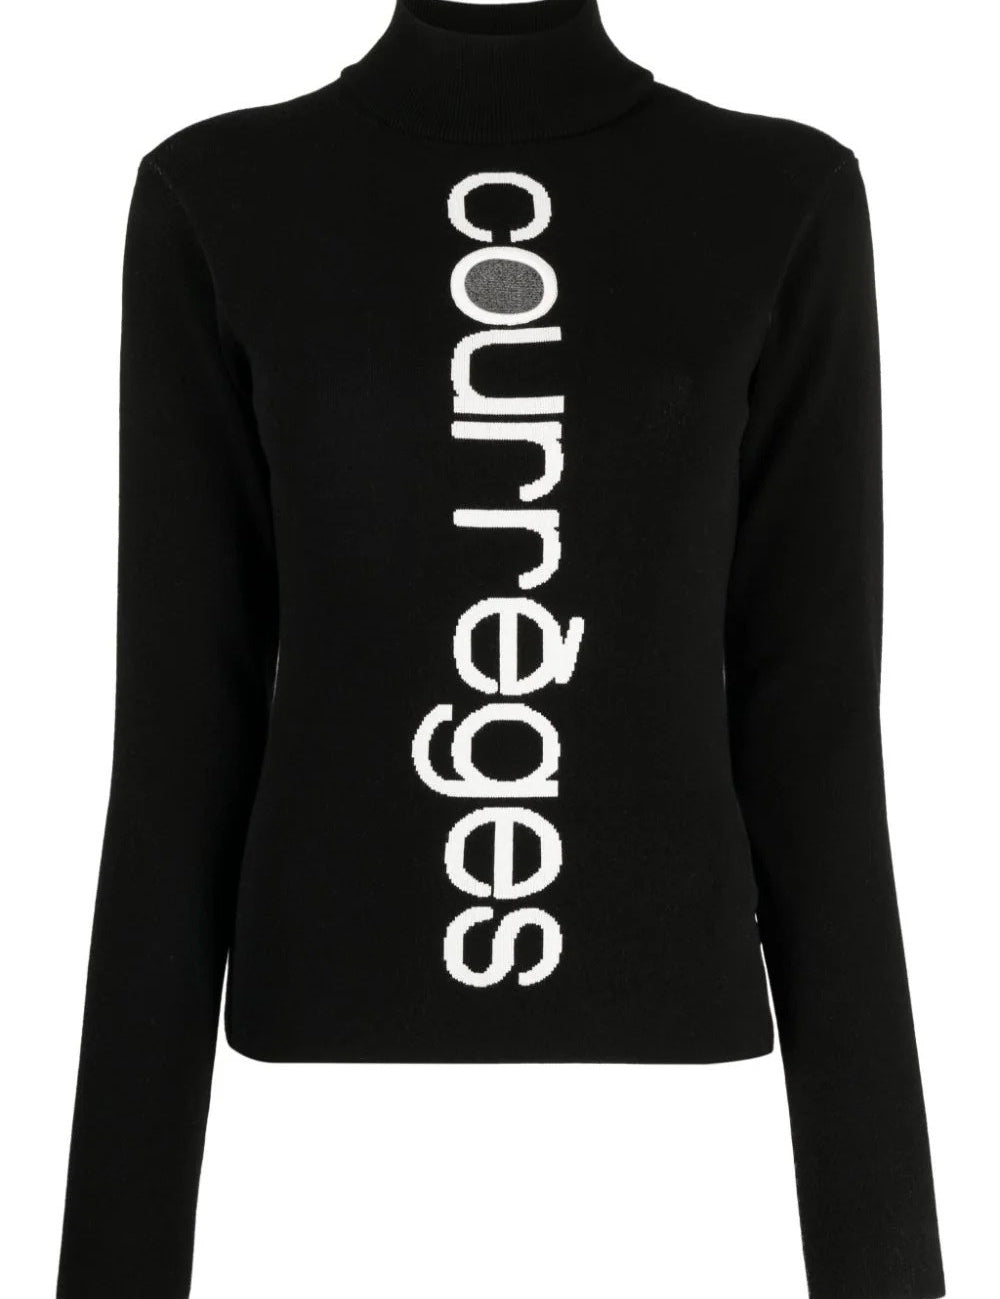 courrges-intarsia-sweater.jpg